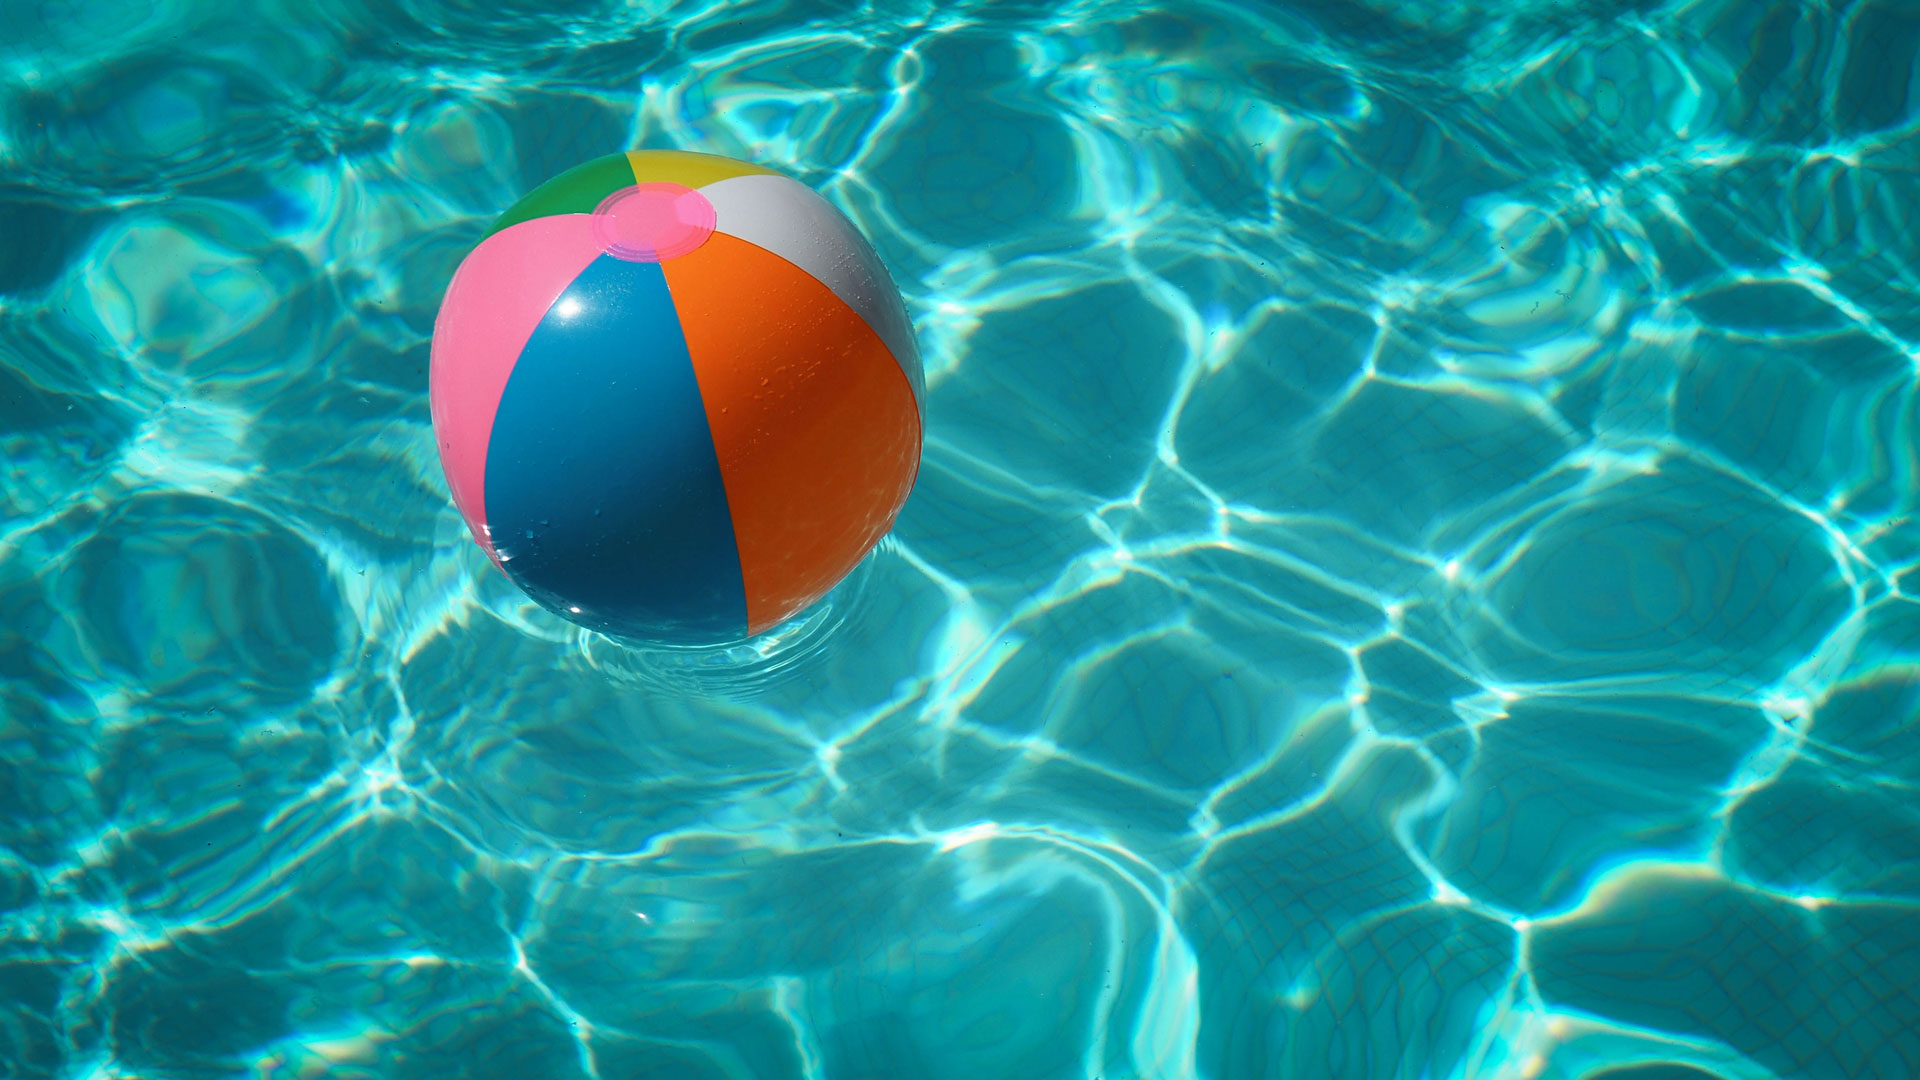 A rainbow beachball floating in a blue swimming pool.